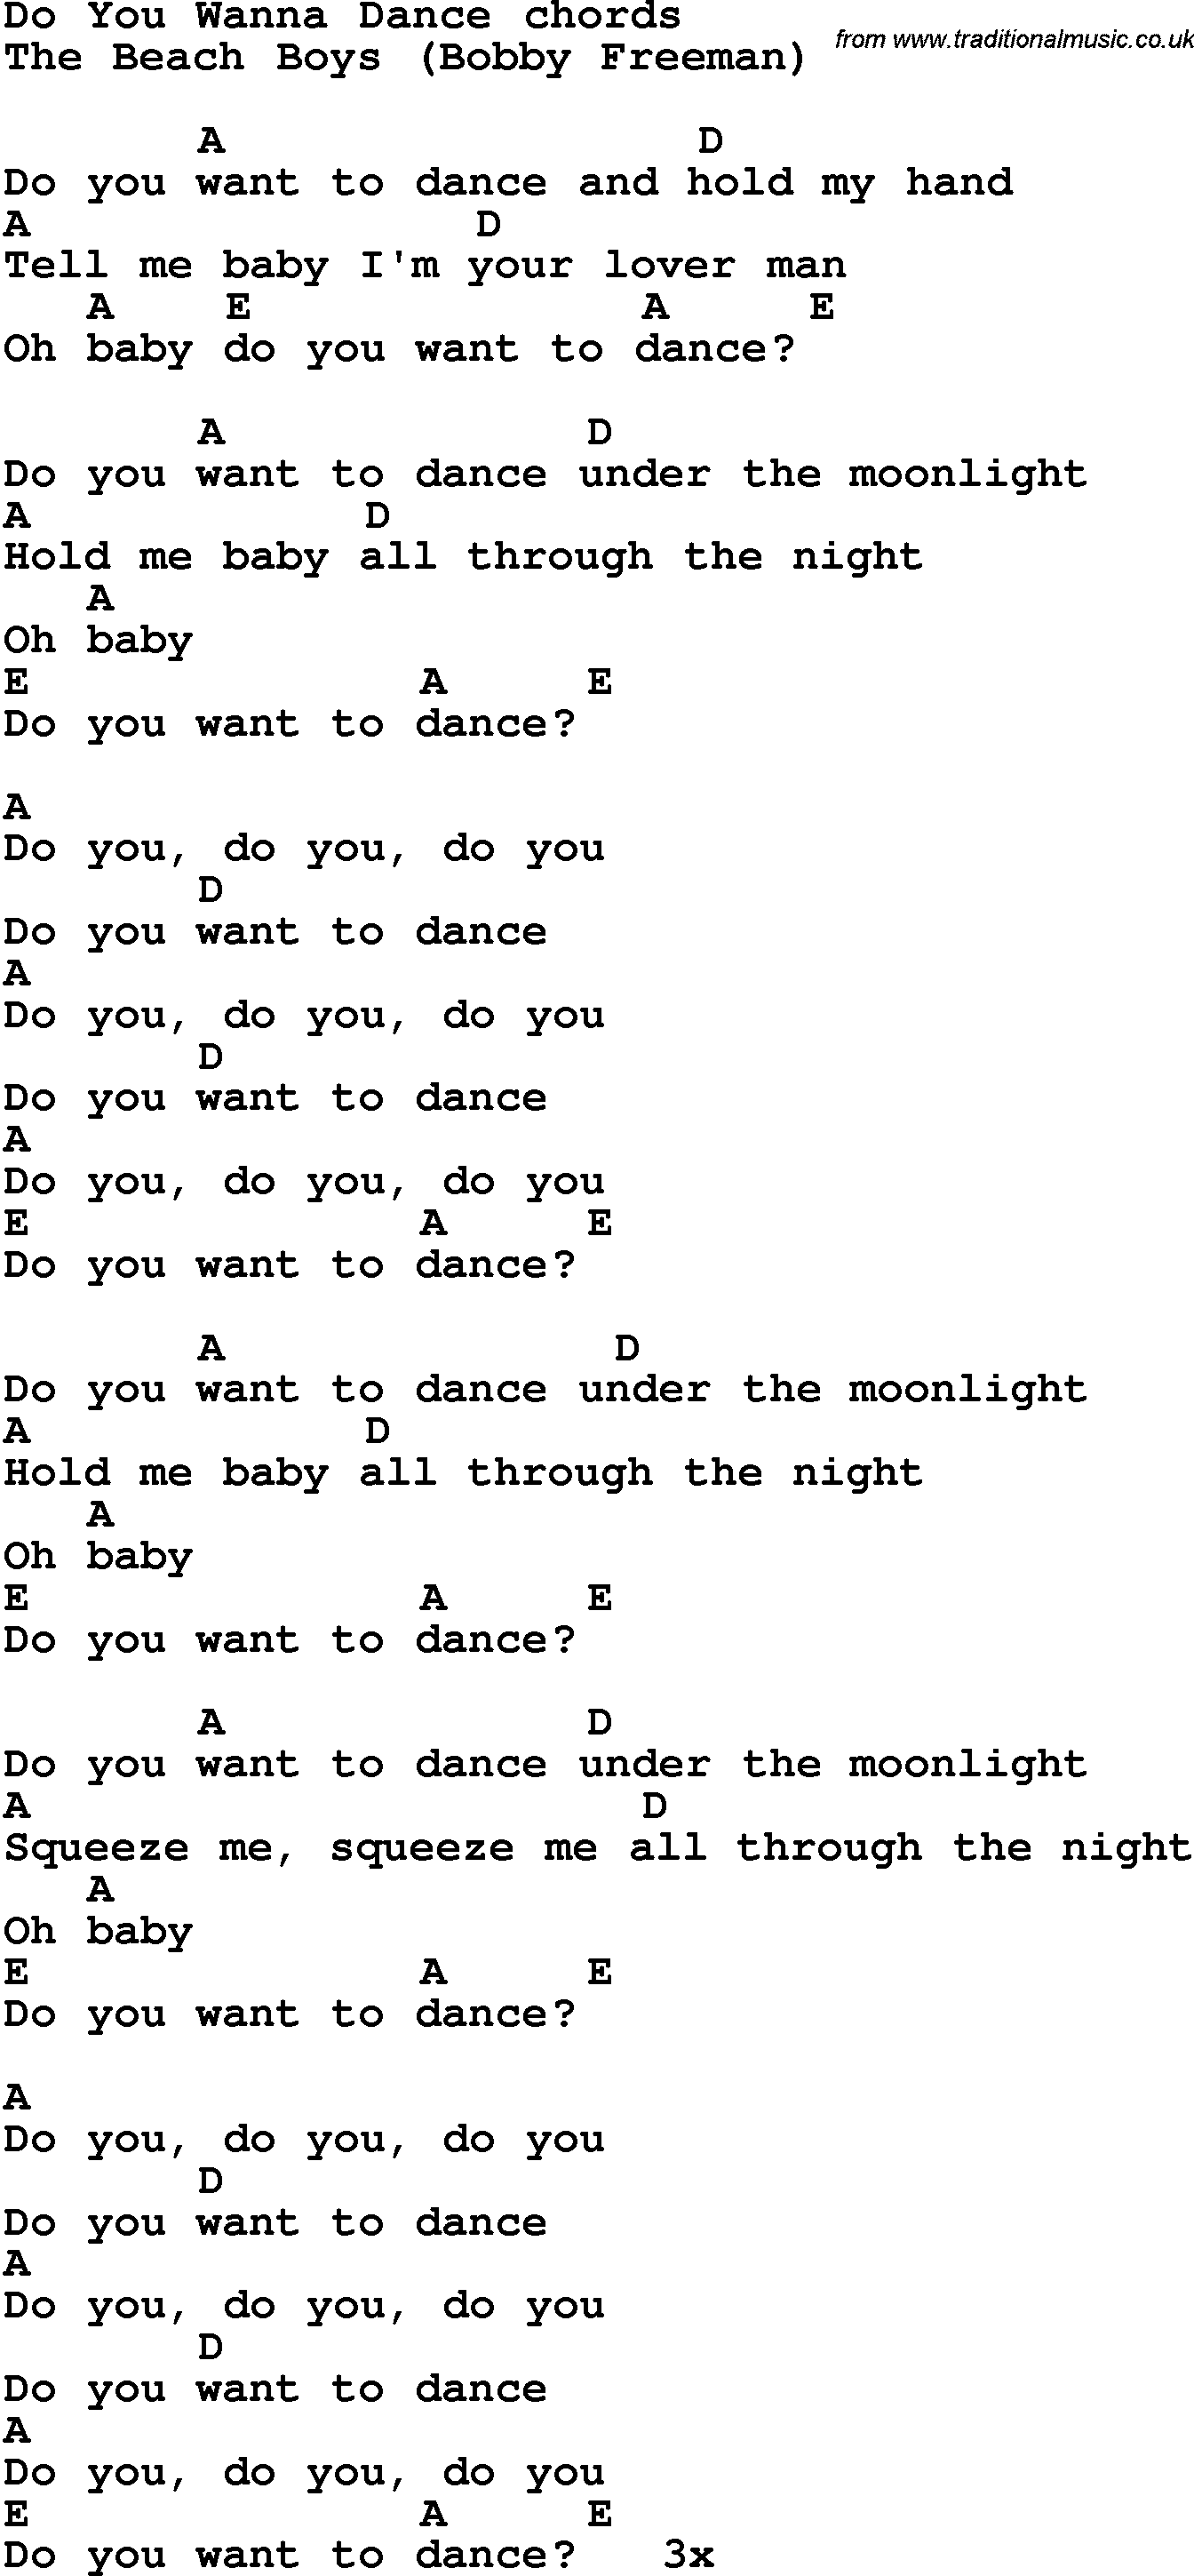 Song Lyrics with guitar chords for Do You Wanna Dance